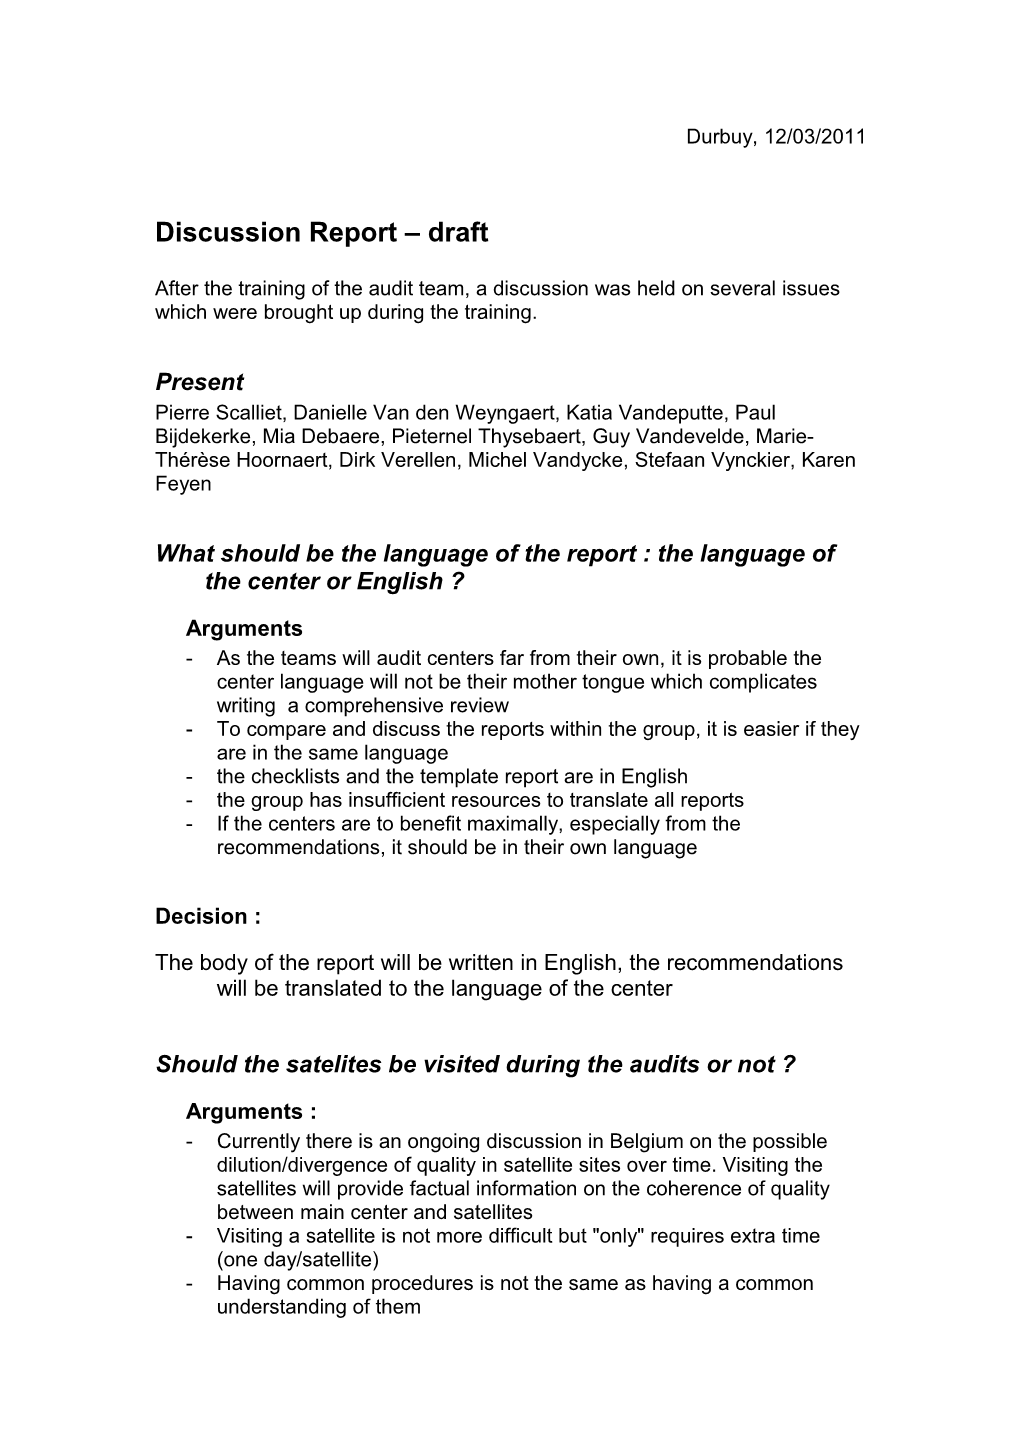 Discussion Report Draft